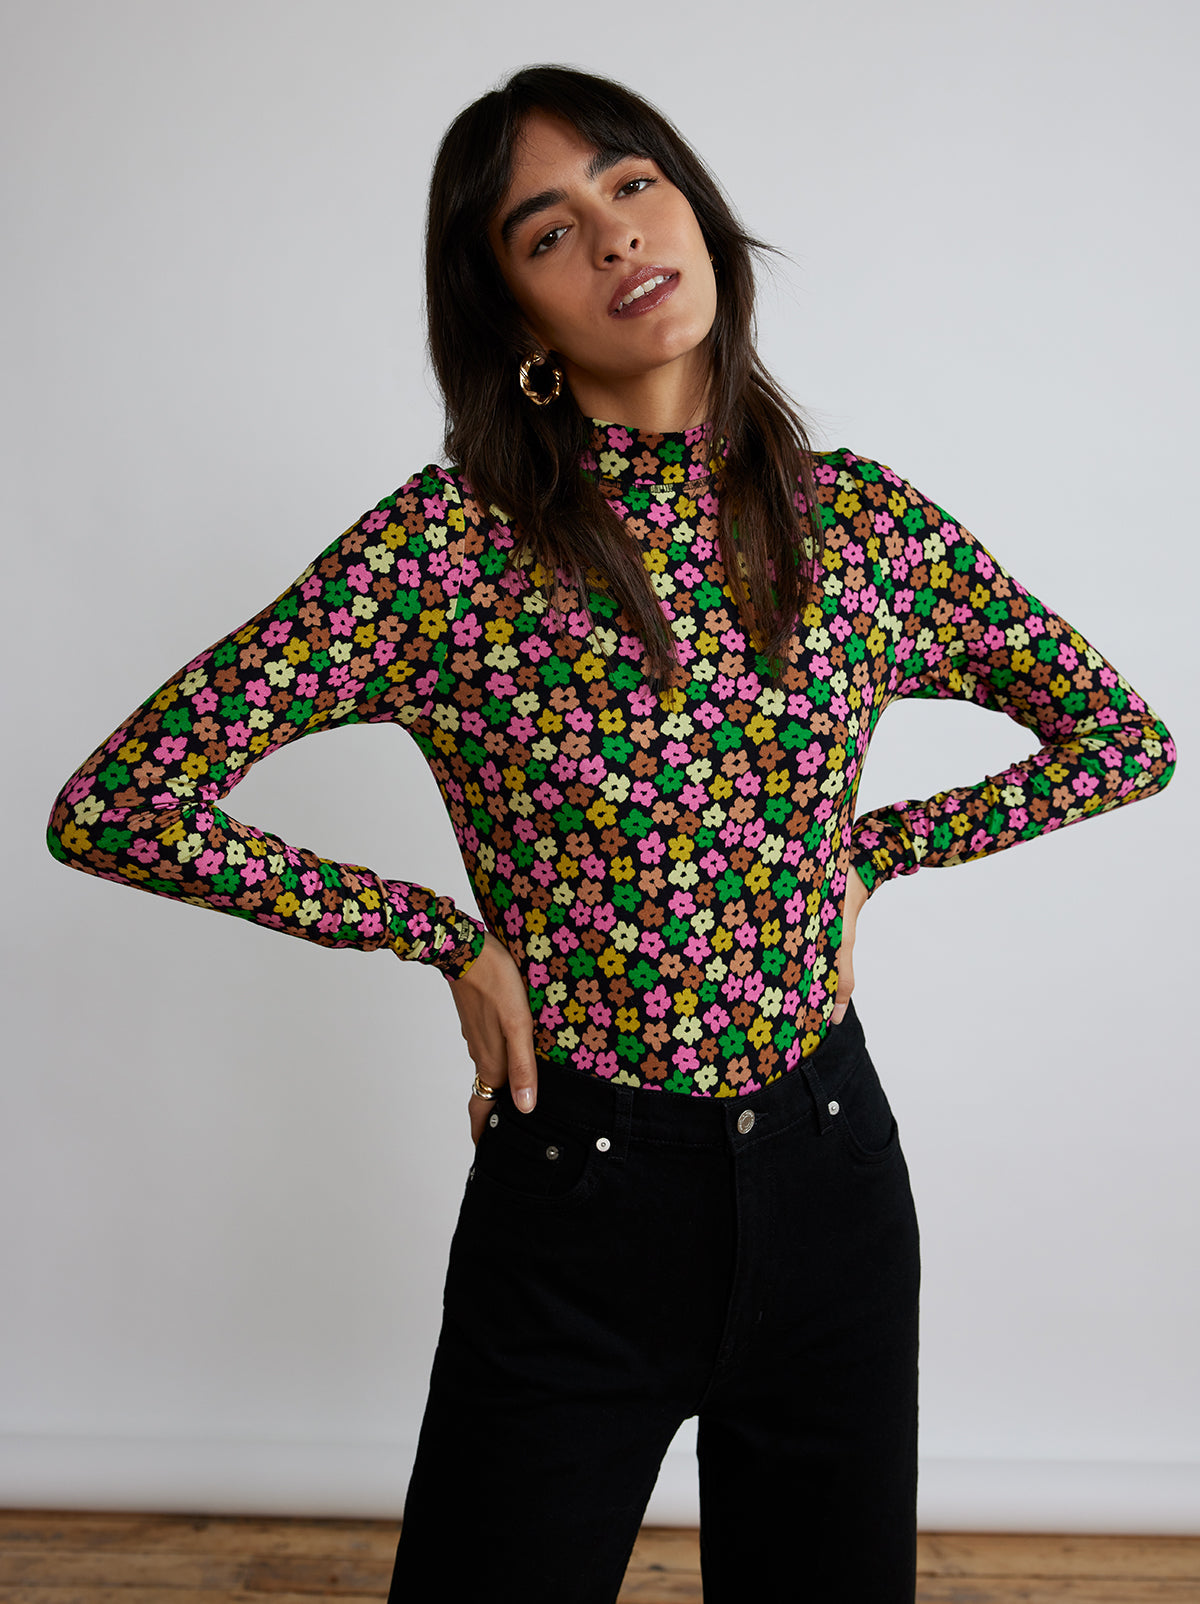 Paige Blurred Floral Jersey Top by KITRI Studio